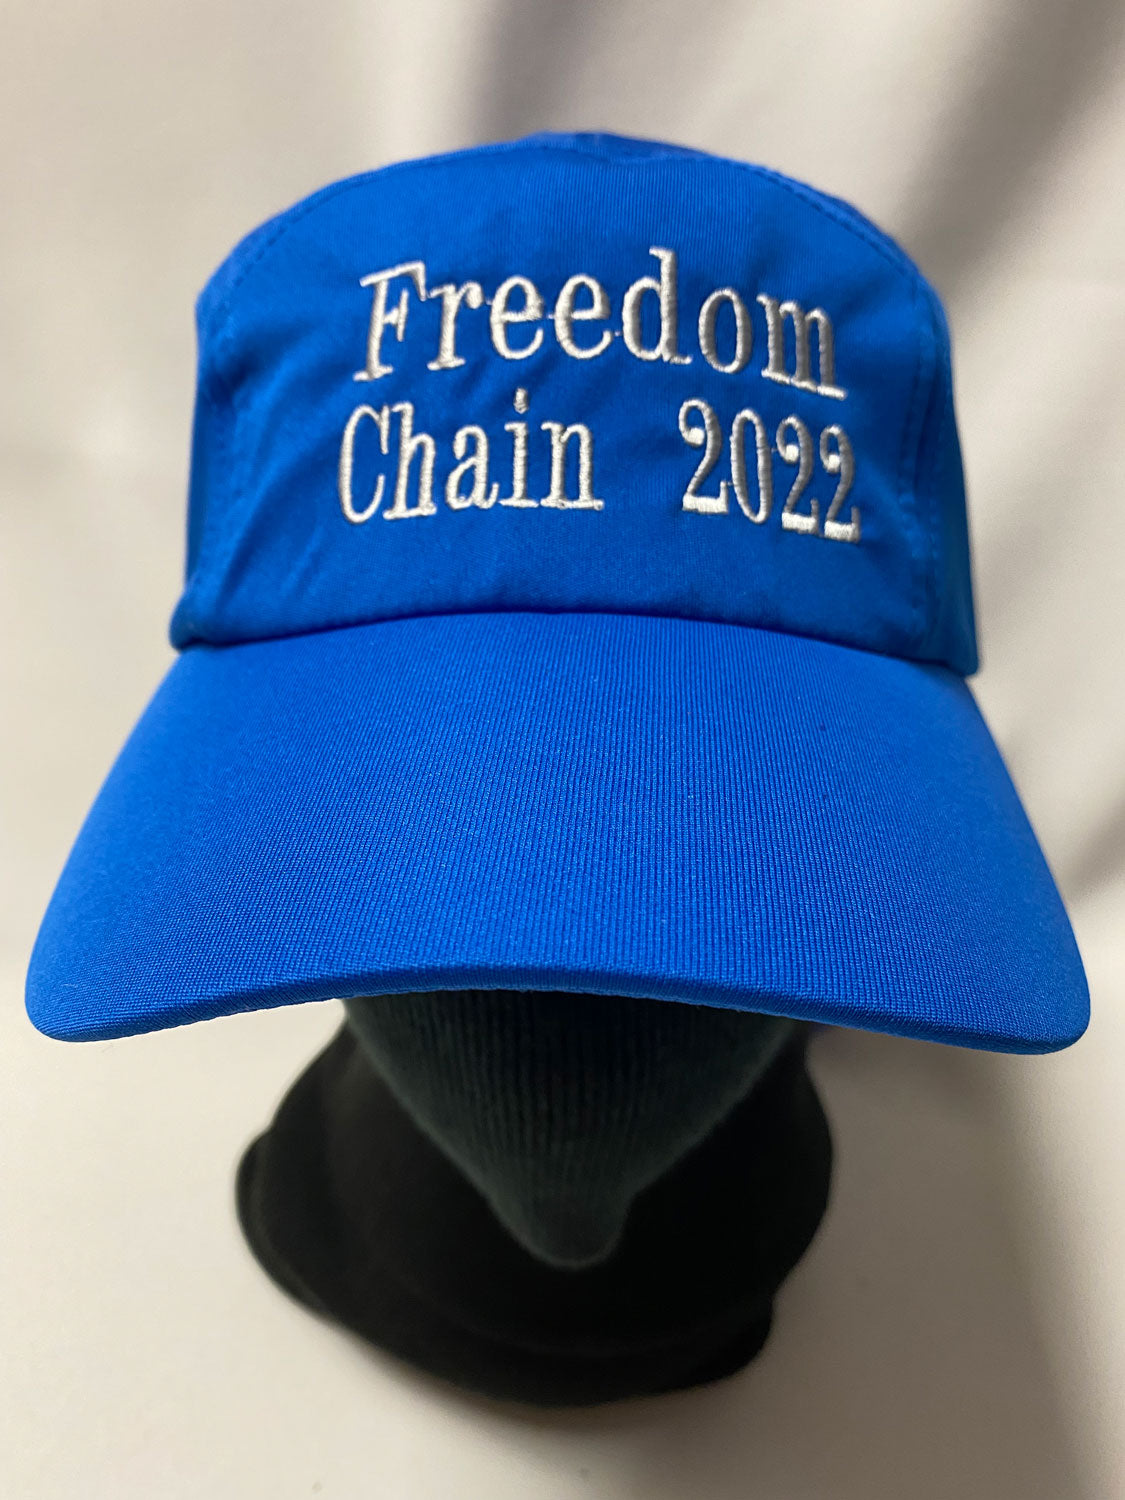 BALL CAP FREEDOM CHAIN 2022 - white embroidery on royal blue